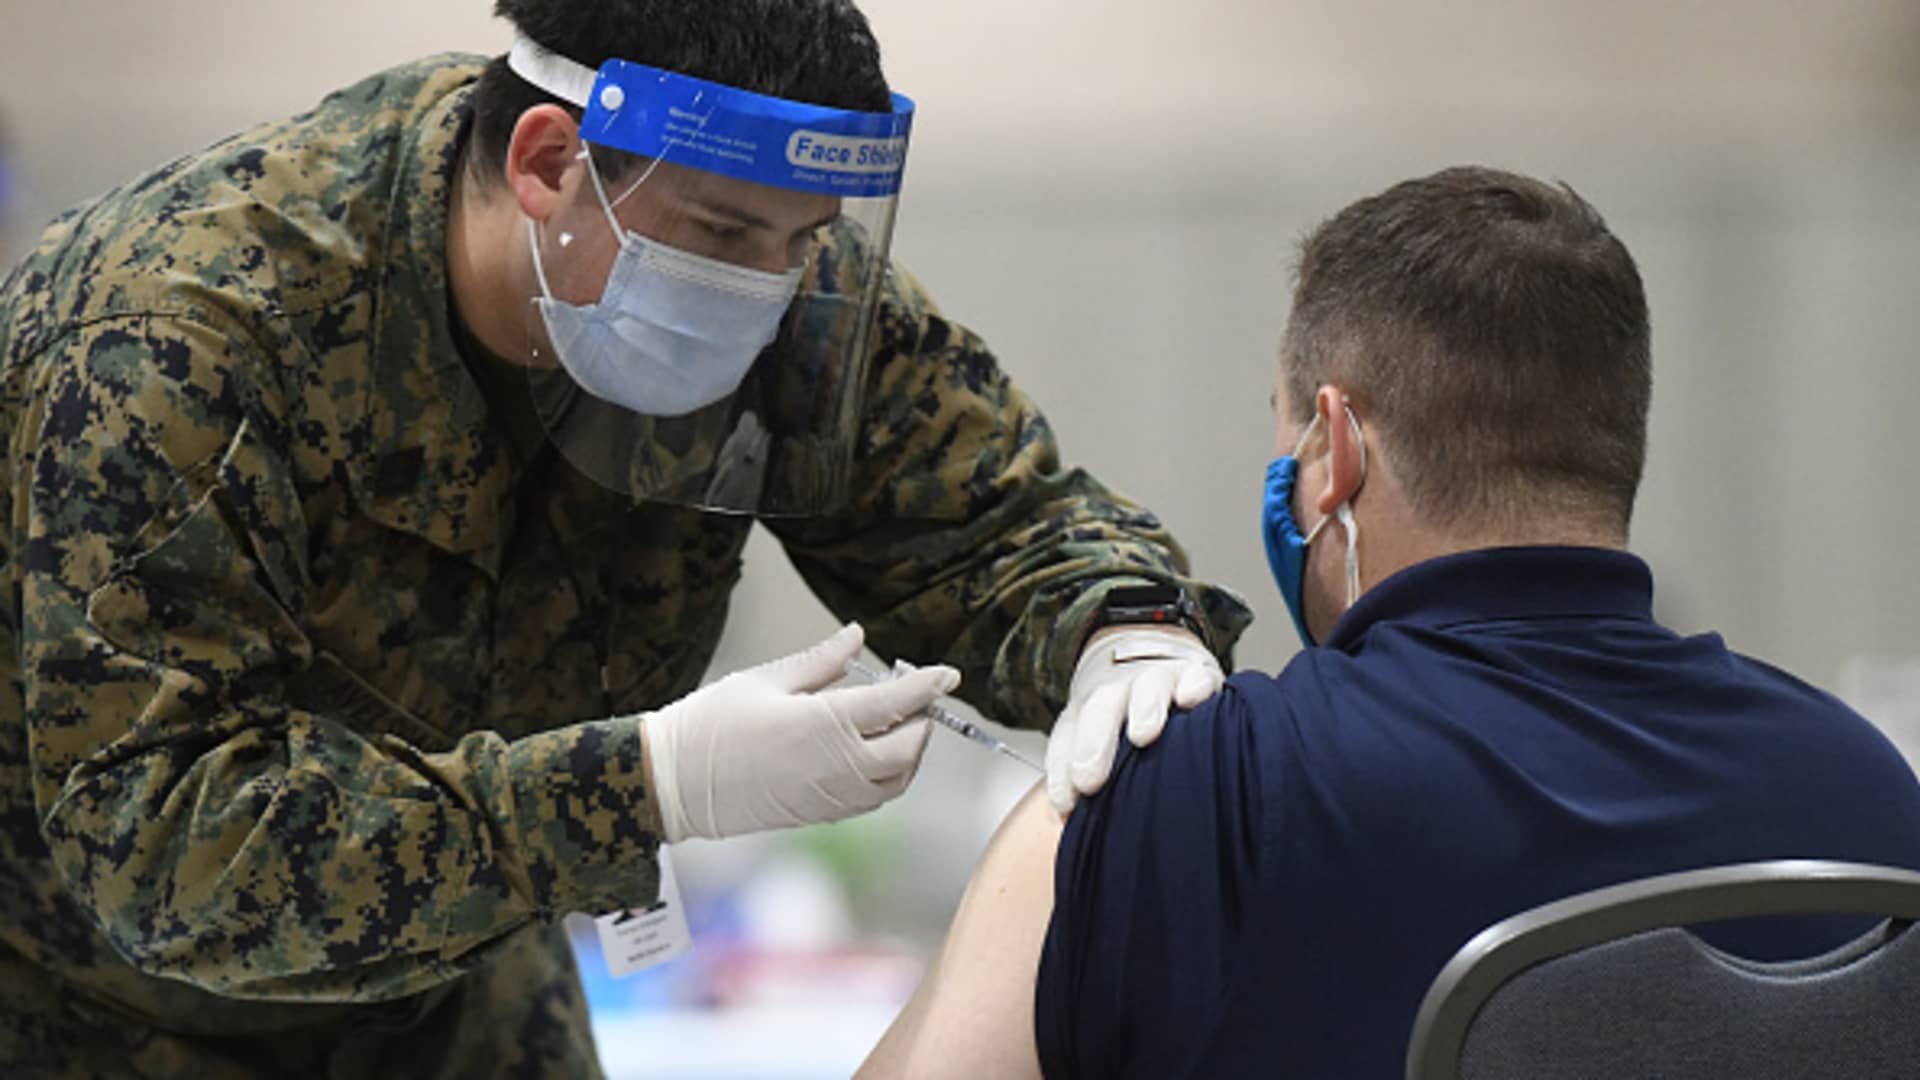 A member of the U.S. Armed Forces administers a COVID-19 vaccine to a police officer at a FEMA community vaccination center on March 2, 2021 in Philadelphia, Pennsylvania.